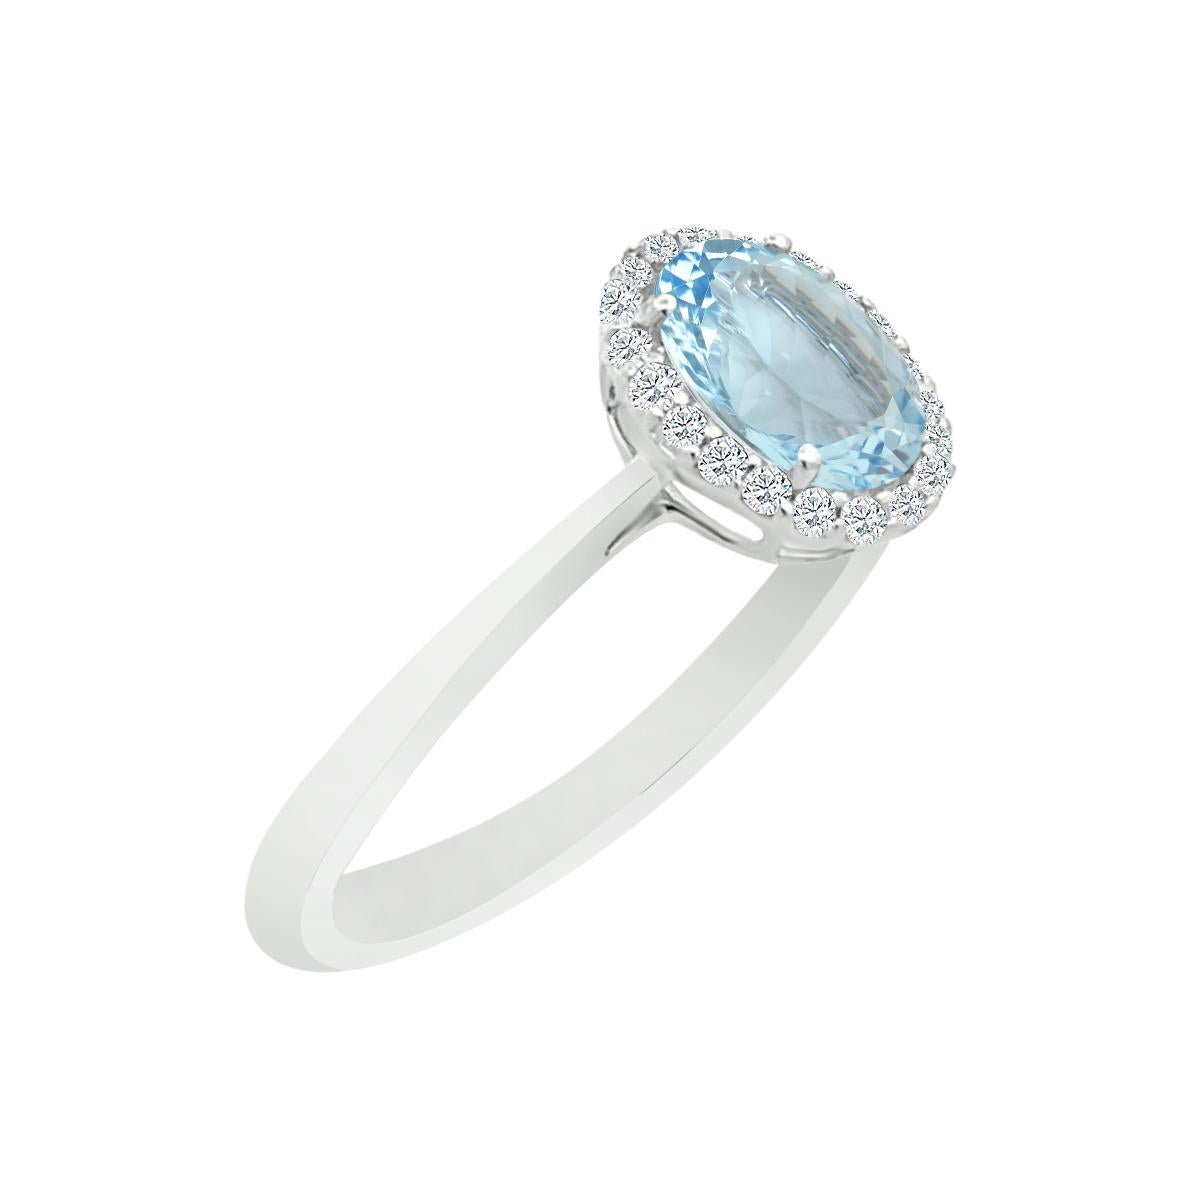 Make Her Sparkle With This Beautiful Tone Of Blue Aquamarine That Captures The shade Of Light Blue Sky.
This Clear, Light Blue Stone Sparkles Like A Diamond But Has A Subtle, Pleasant Shade Of Color For a Unique Style.
This Aquamarine Ring With Fine